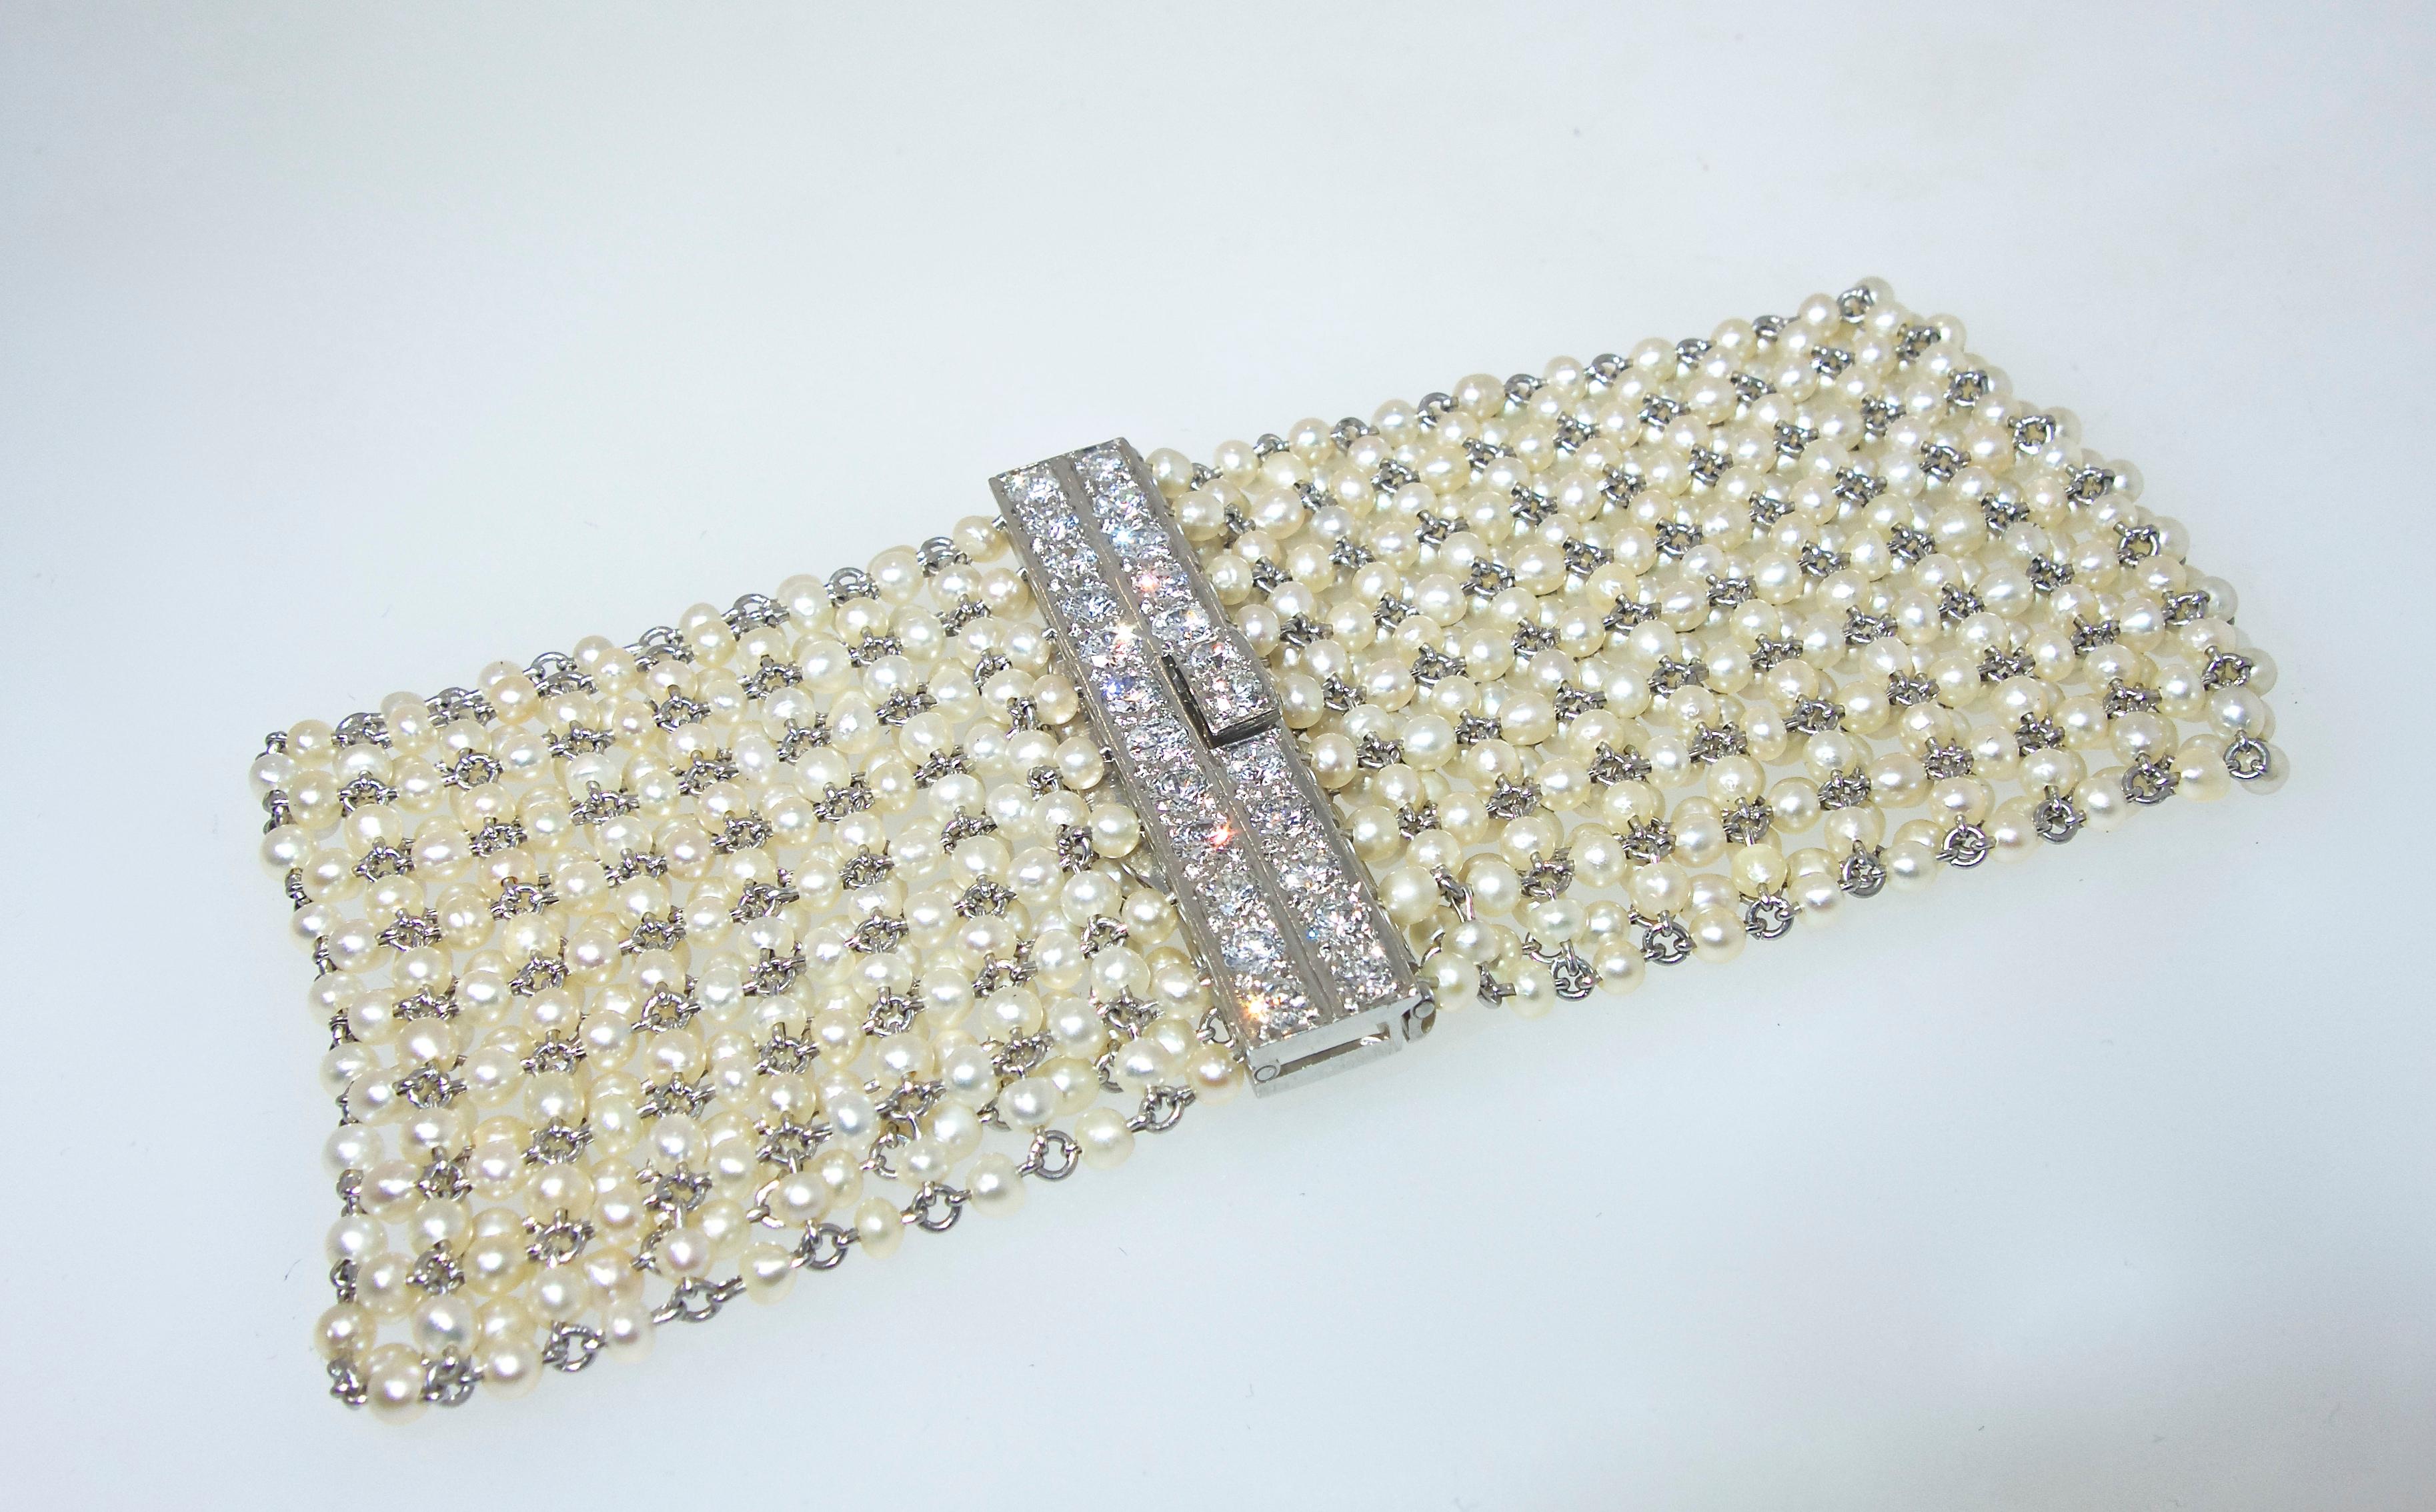 Natural pearls strung on platinum and accent with a fine diamond clasp.  This platinum bracelet made in the early 20th century is 7.25 inches long and 1.5 inches wide.  The natural oriental pearls are all well matched, circular and display a fine